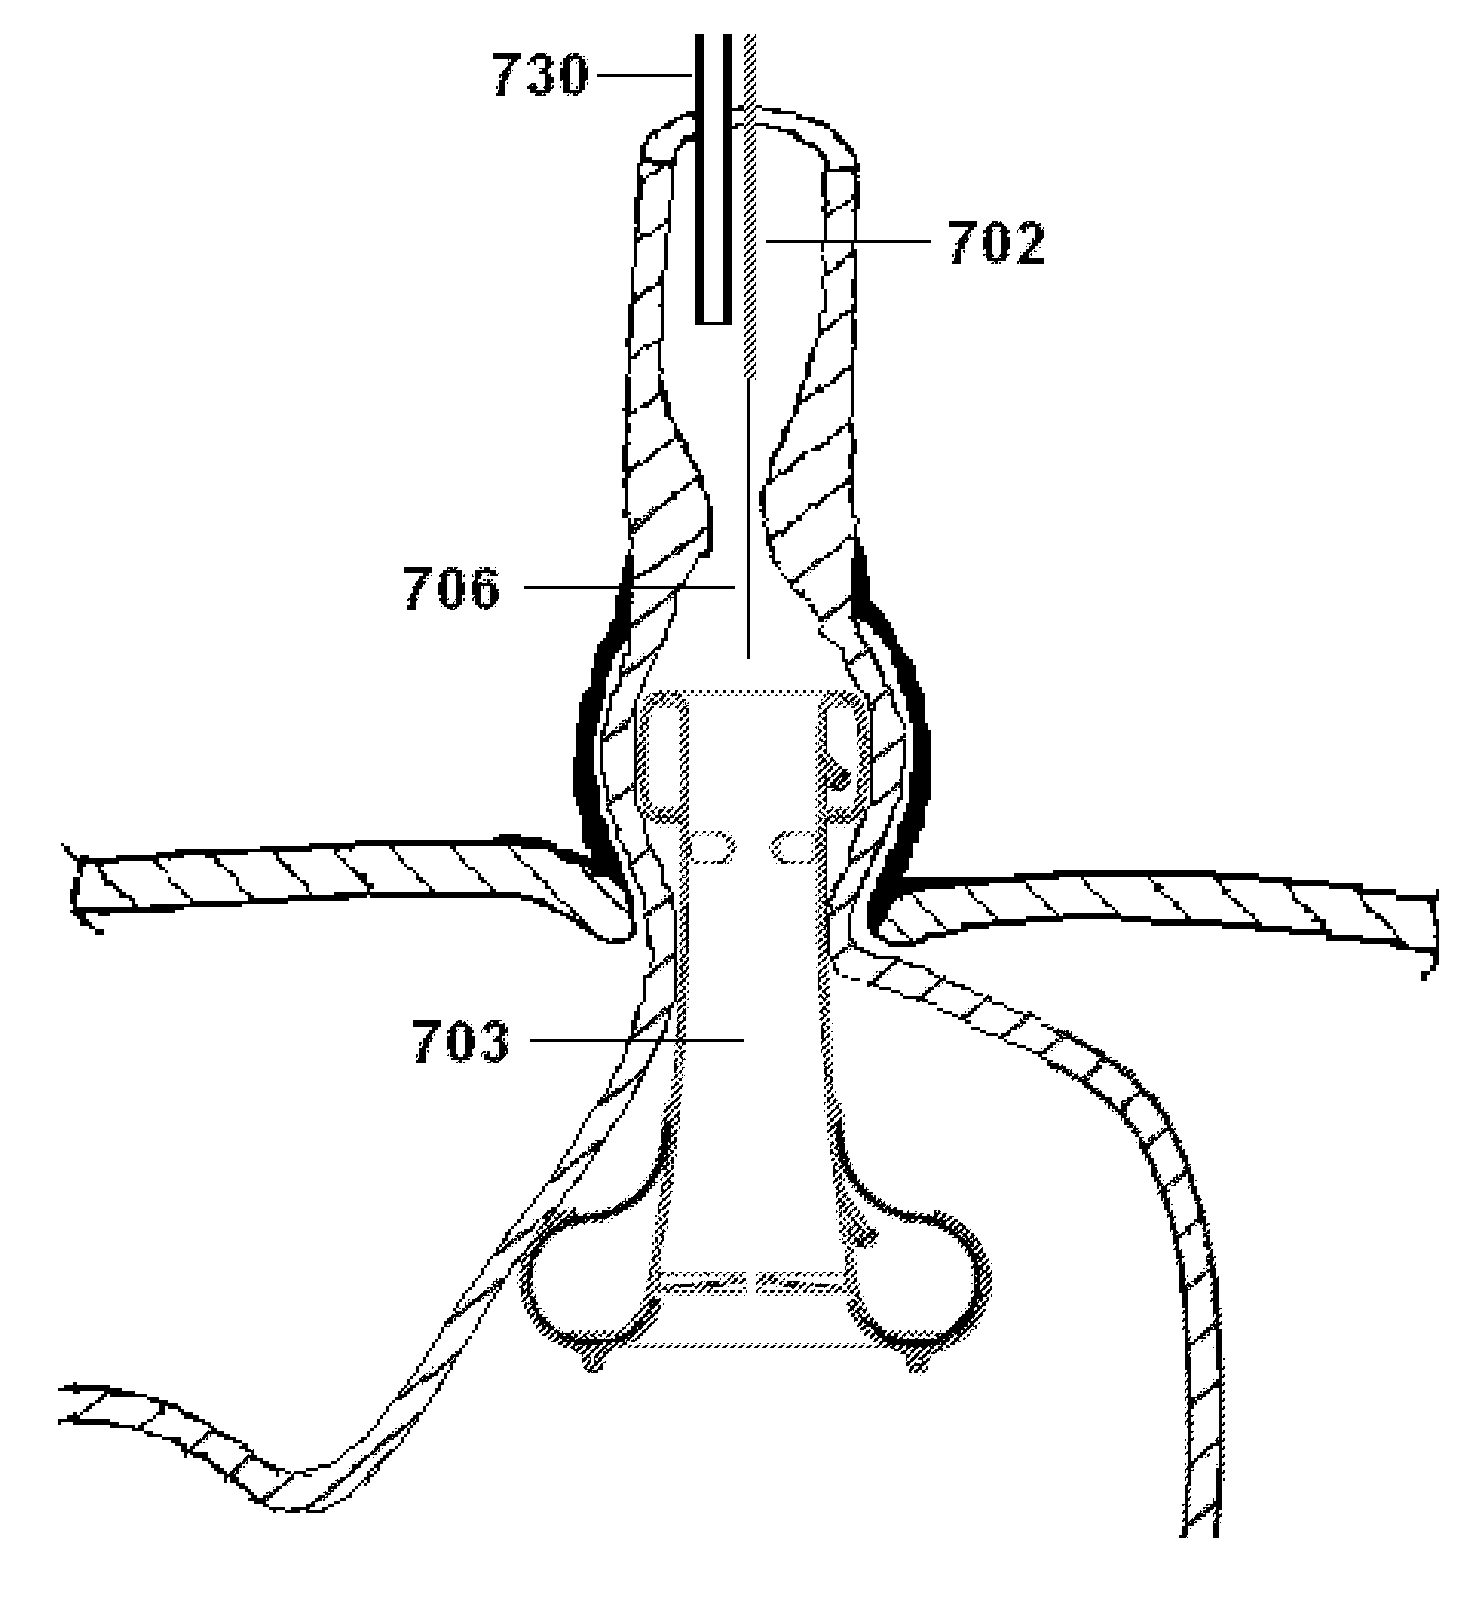 Anti-reflux devices and methods for treating gastro-esophageal reflux disease (GERD)